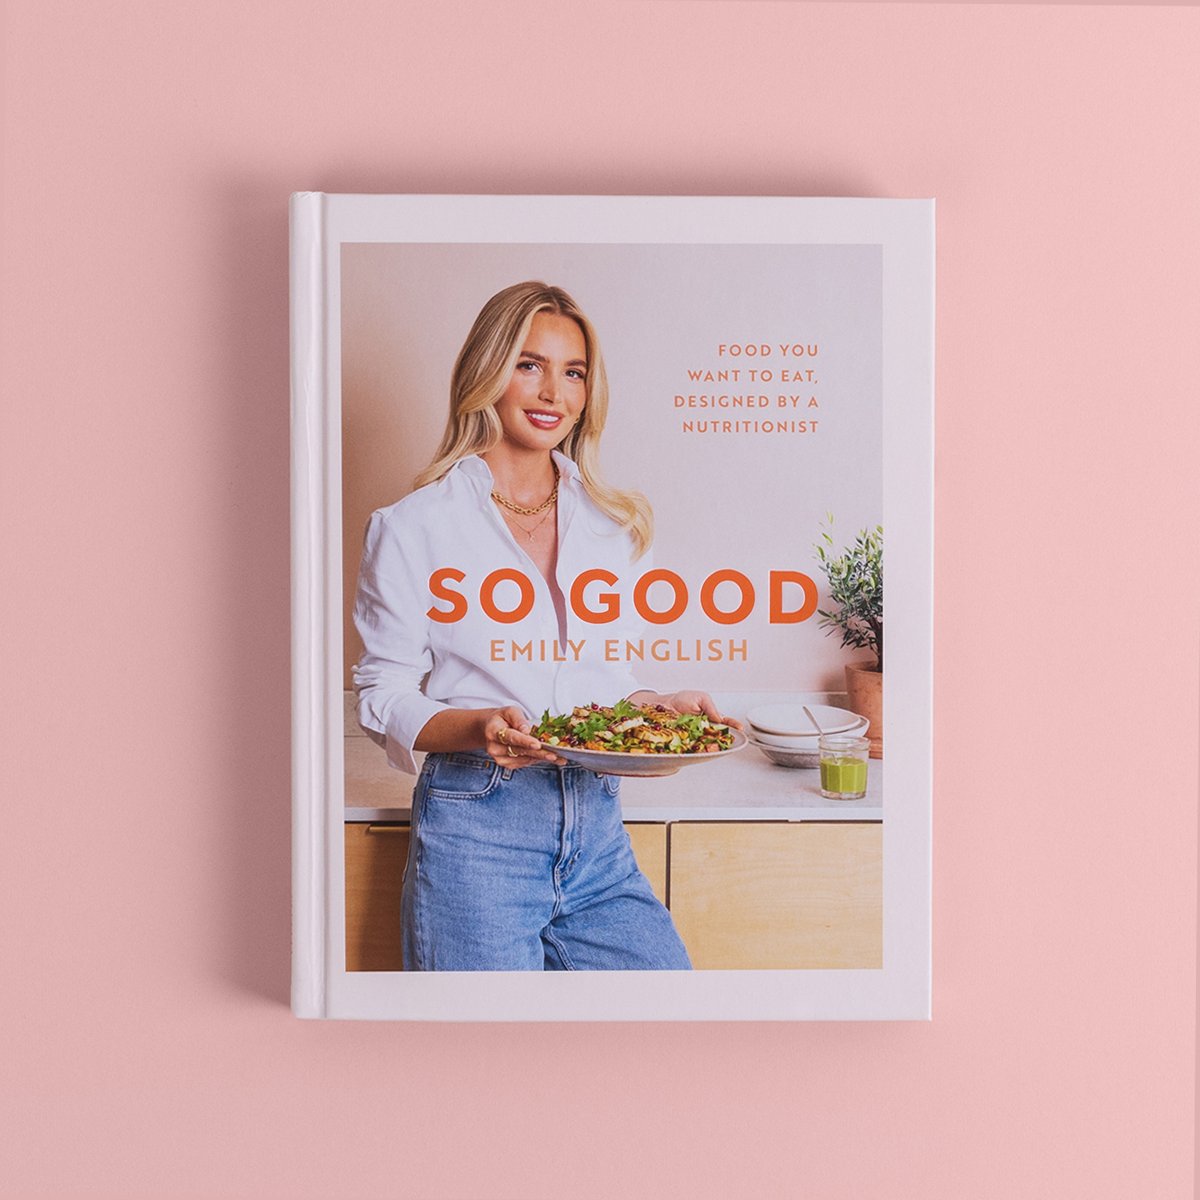 The Number 1 Sunday Times Bestseller From qualified nutritionist Emily English comes SO GOOD, a gorgeous collection of 80 tasty, vibrant and nutritionally balanced recipes to nourish your body and bring you joy with every bite geni.us/SoGoodBook